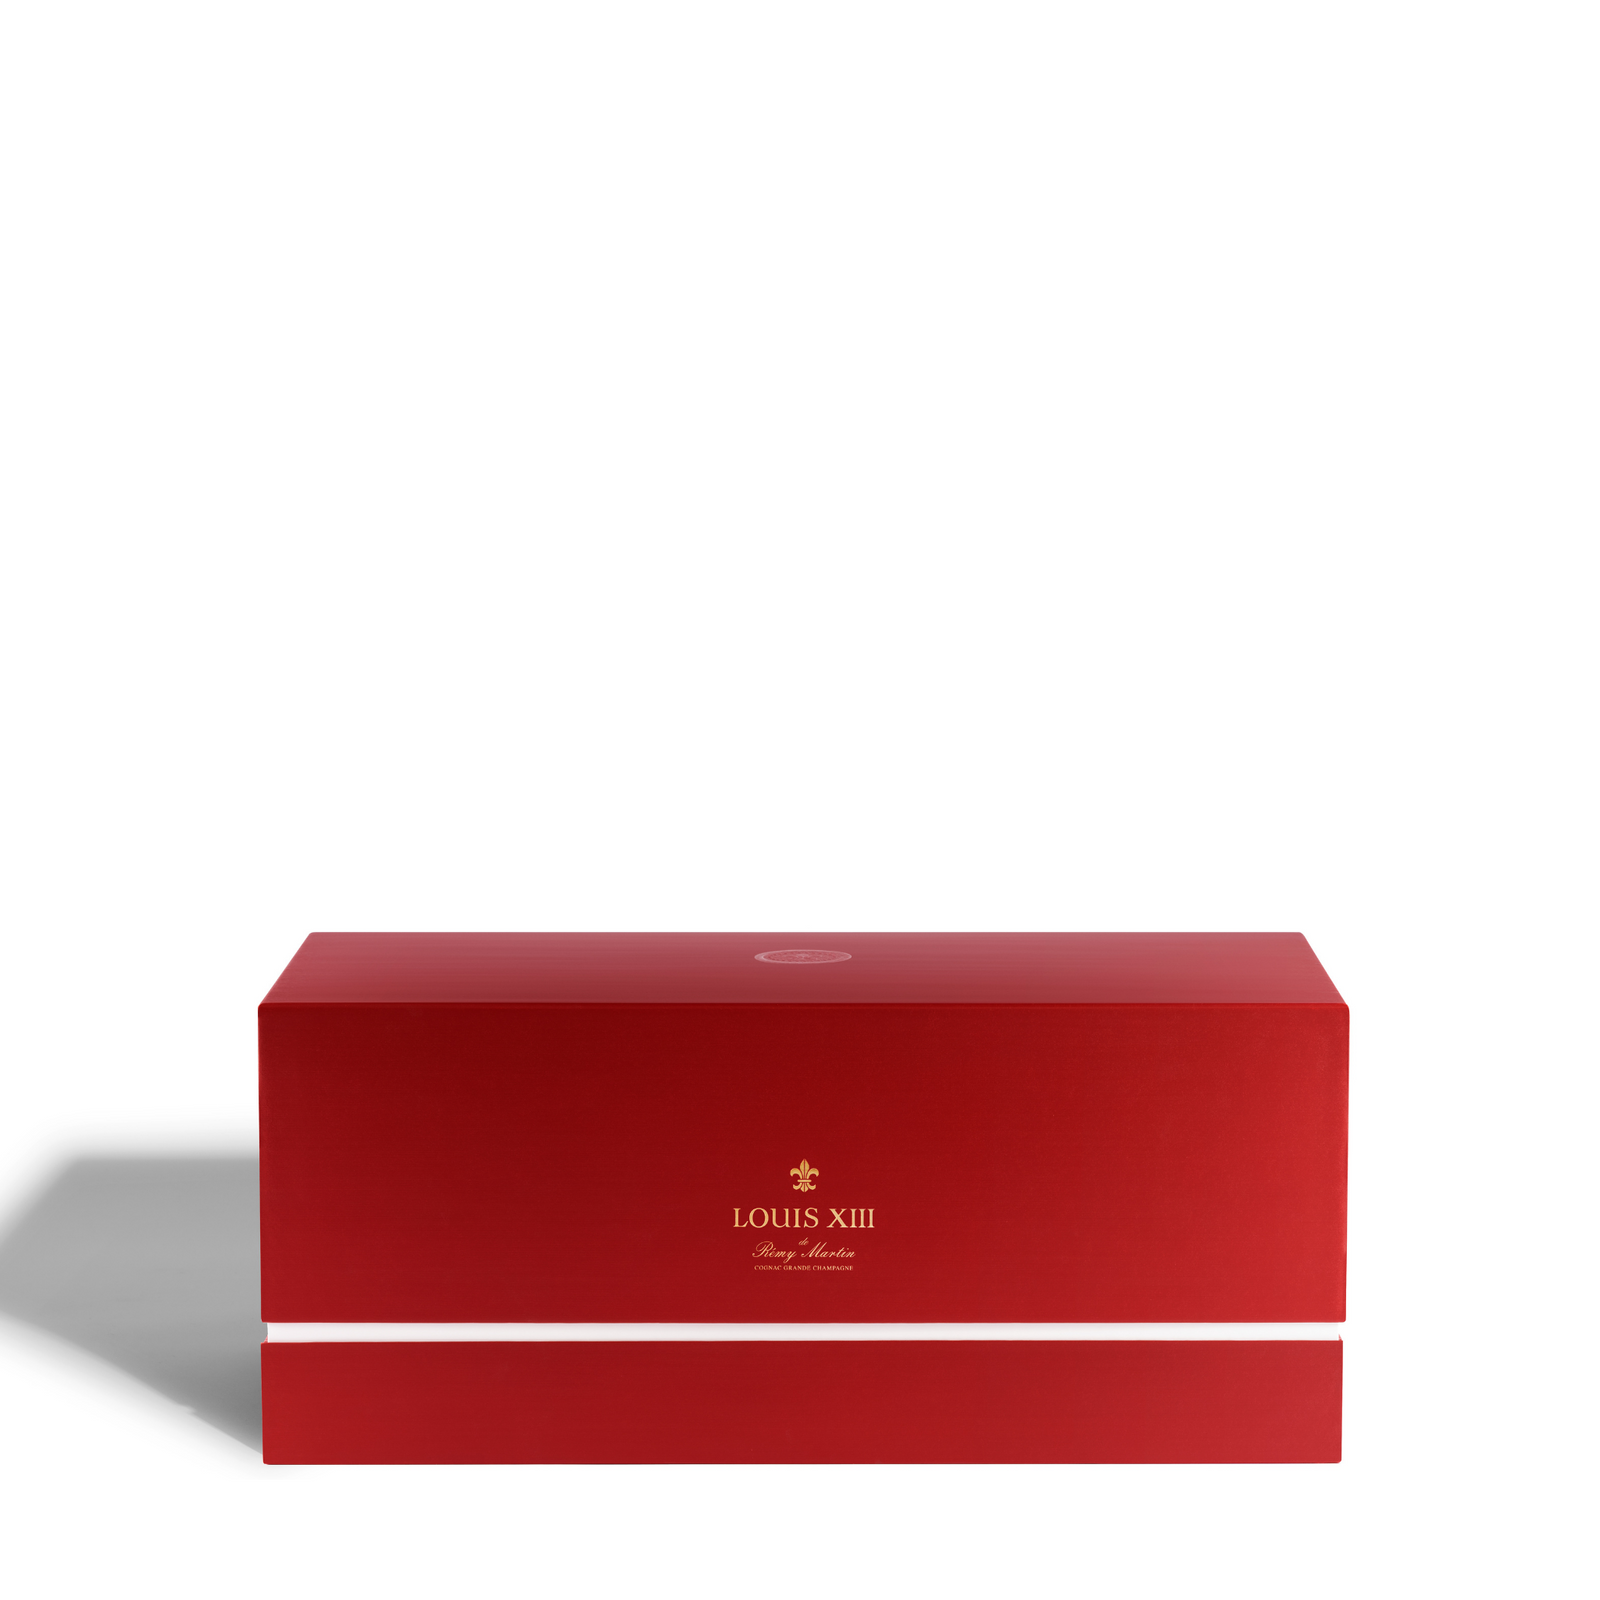 A packshot of a closed red box containing souvenir set